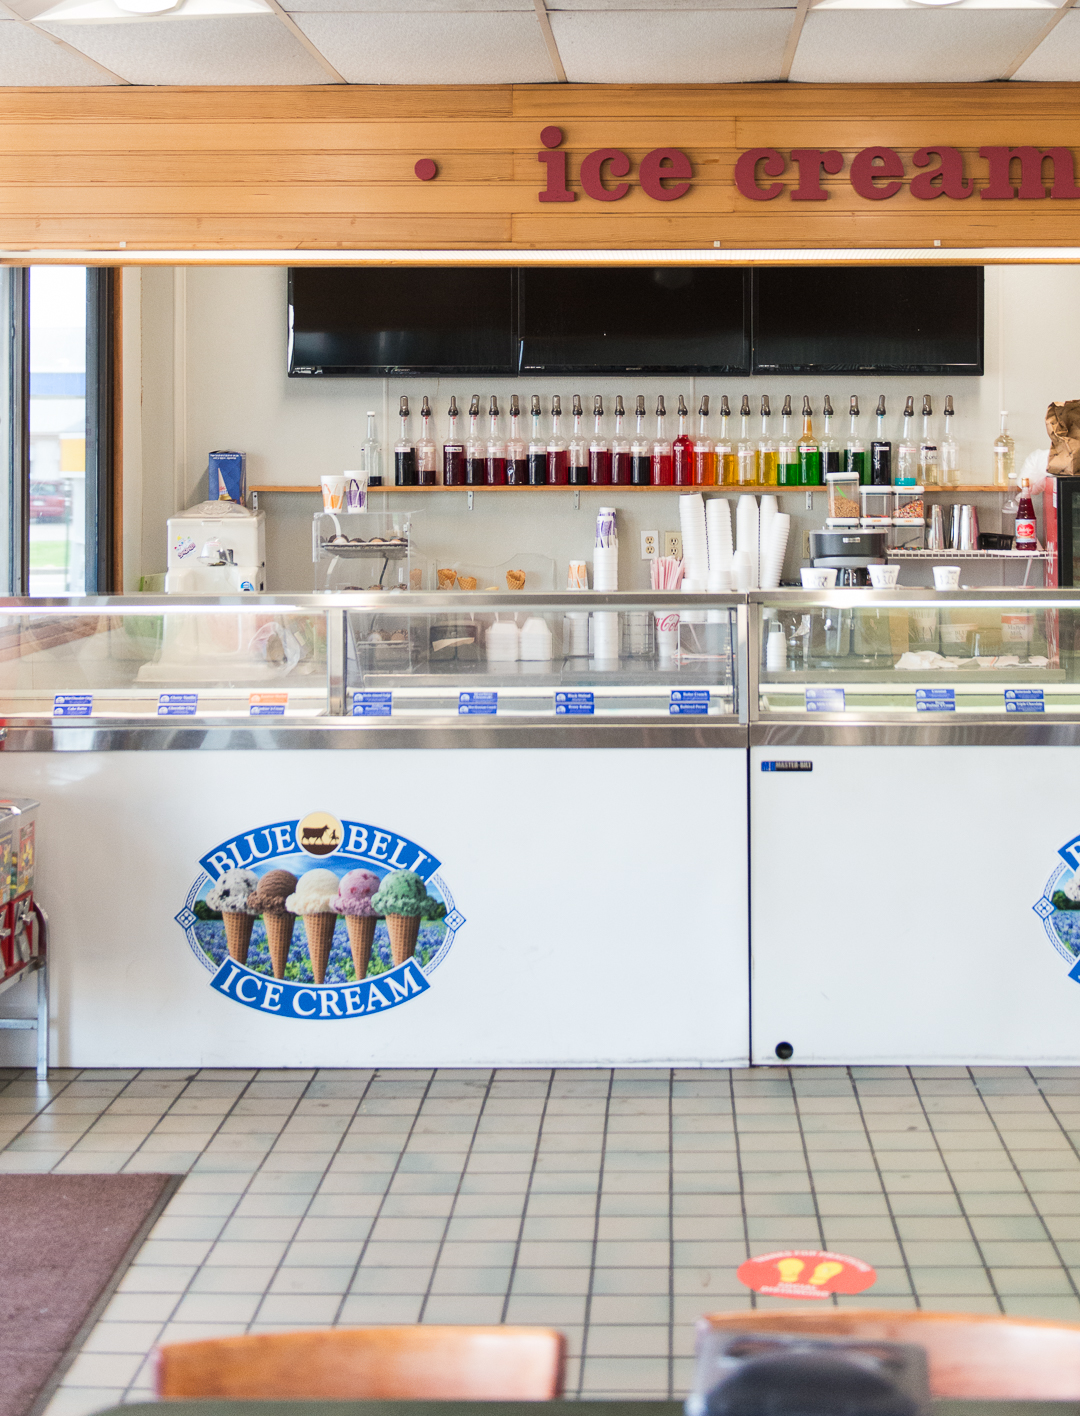 Get the Scoop on Smithsonian's Ice Cream Parlor